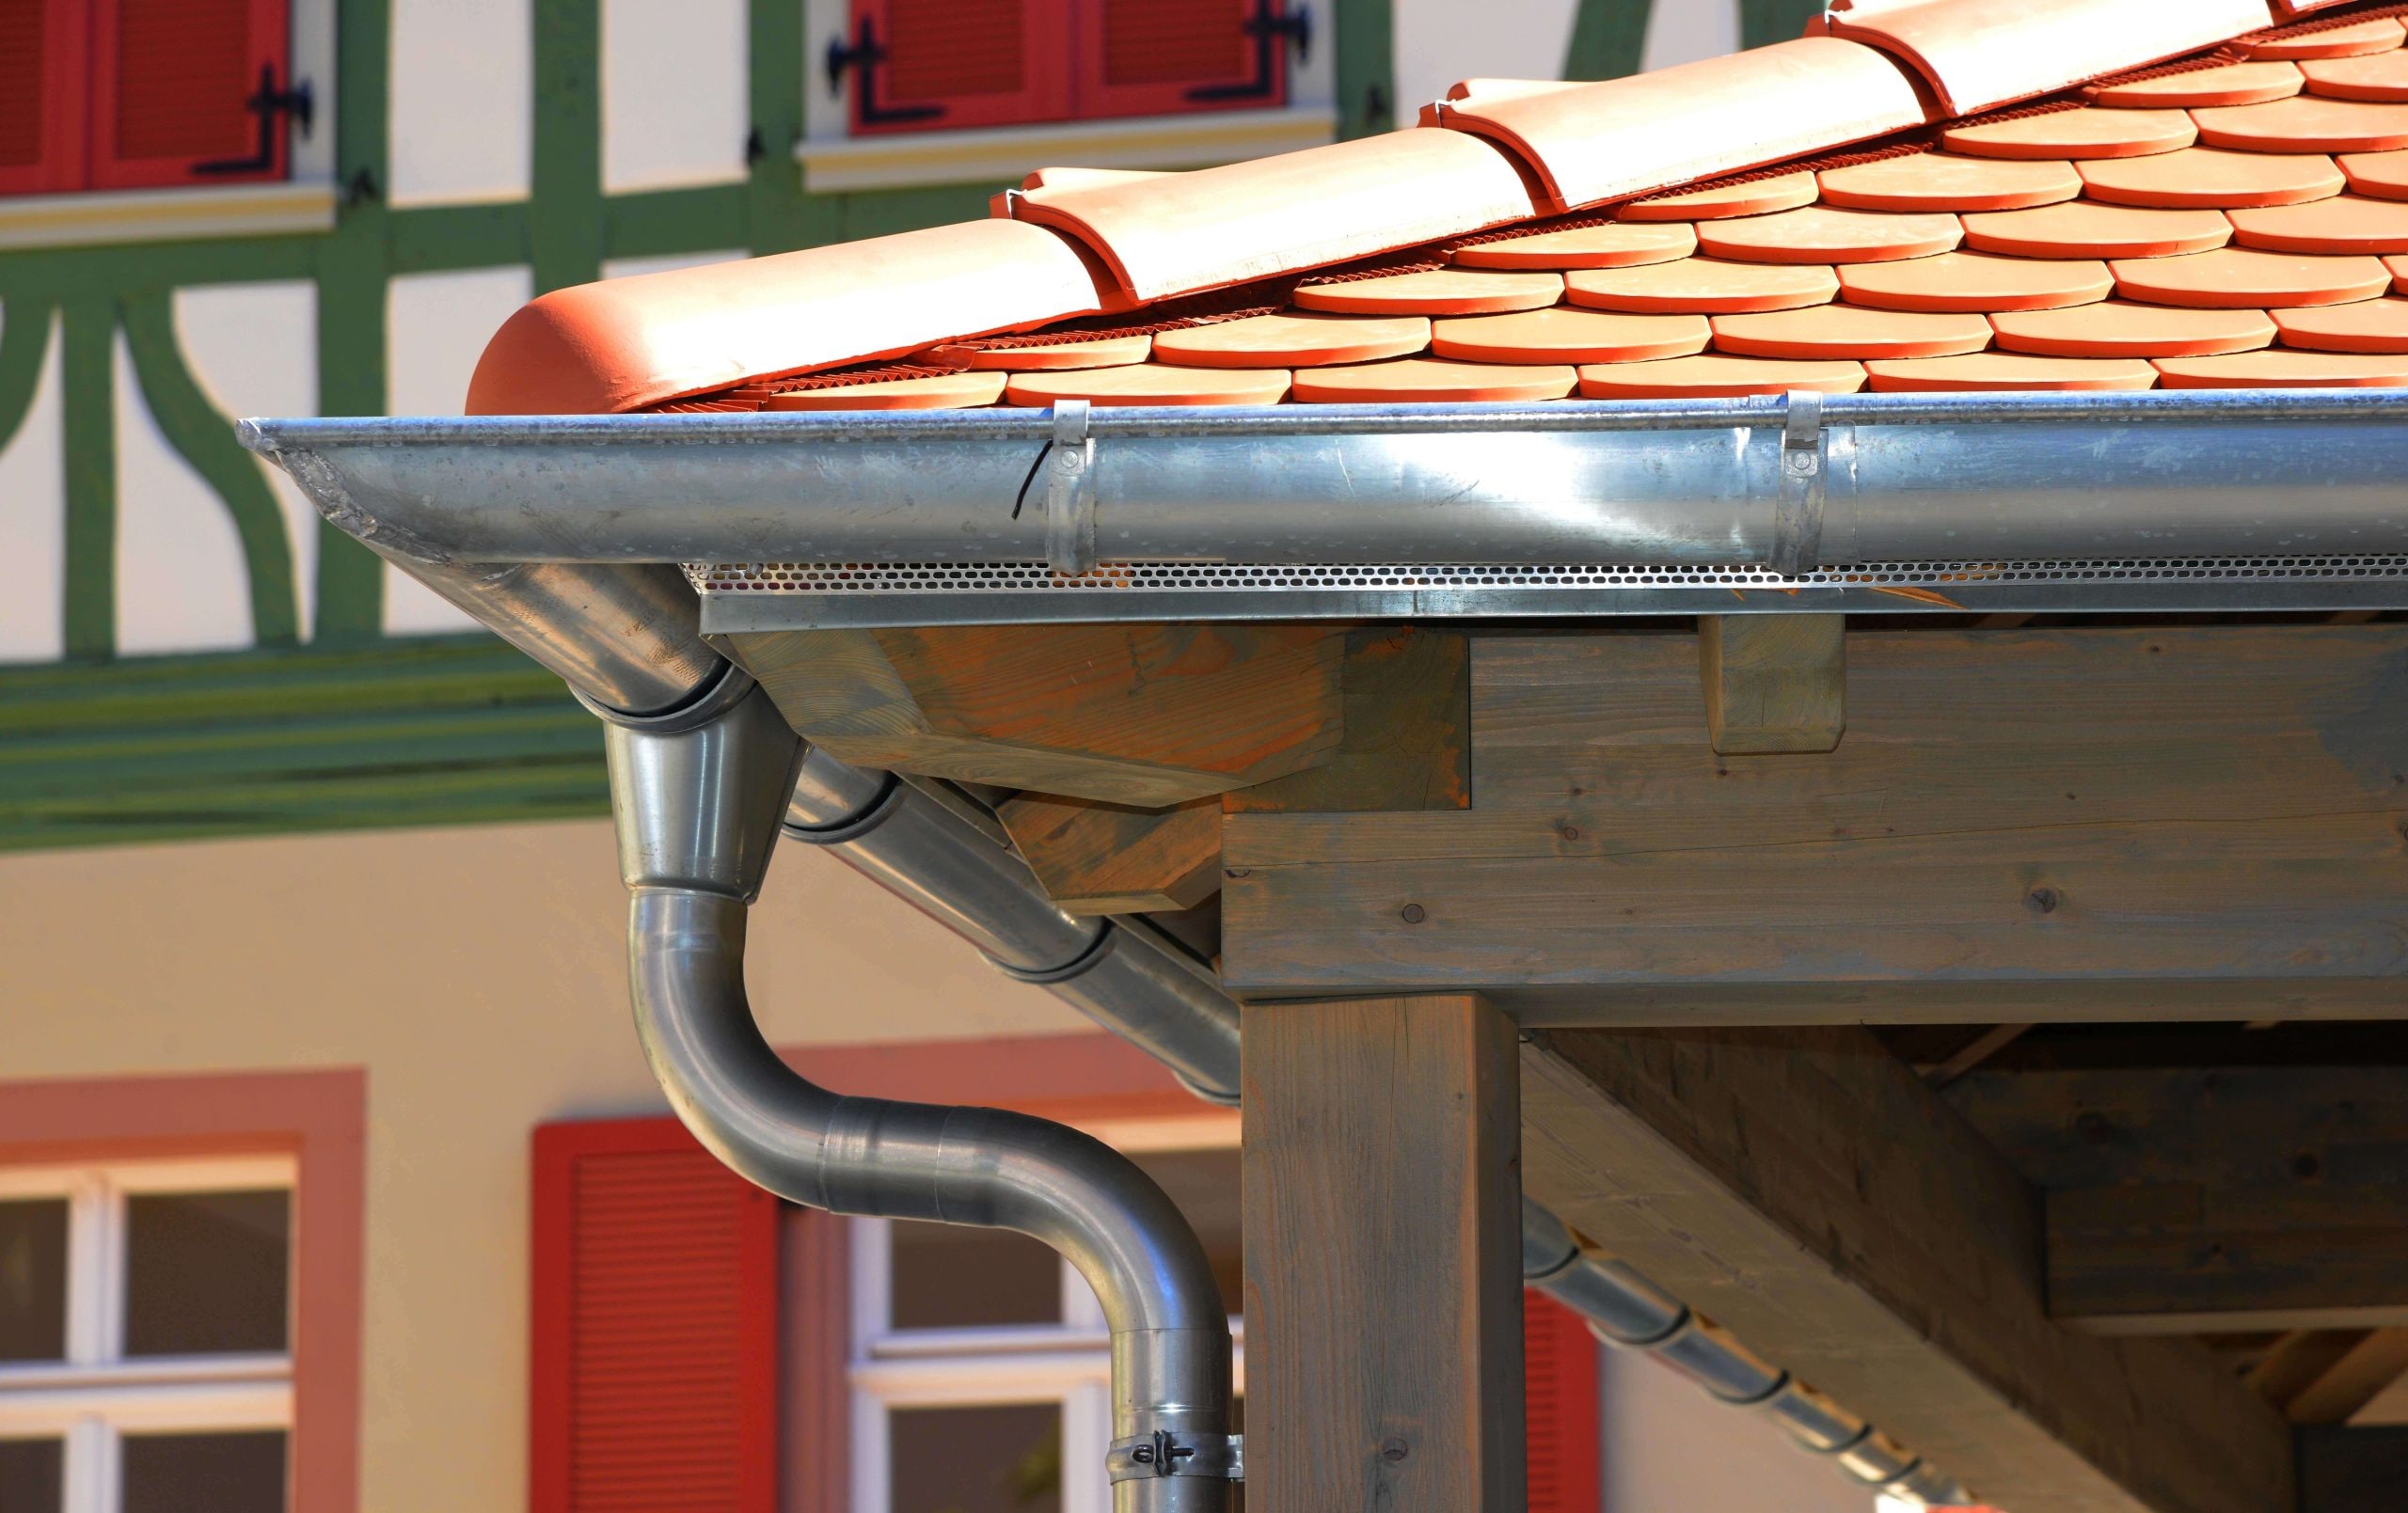 Corrosion-resistant steel gutters for effective rainwater drainage in Douglasville